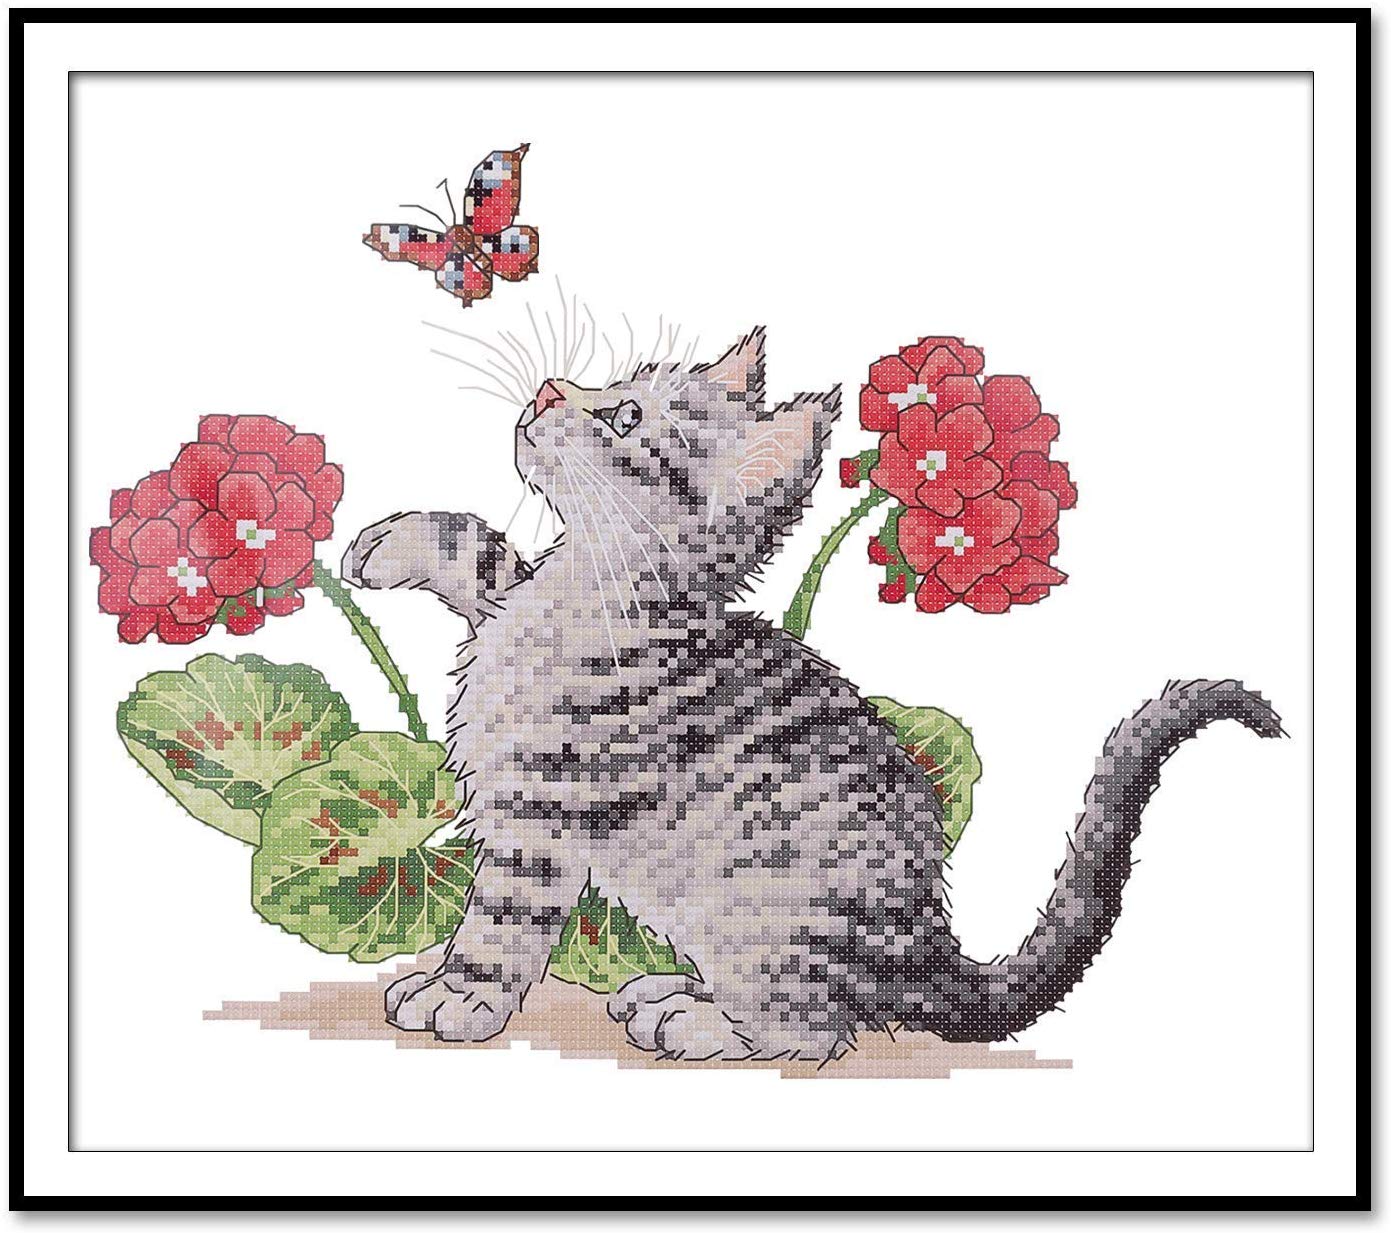 CRAFTILOO Cats Cross Stitch Kits for Beginners. 5 Stamped Cross Stitch Kits for Kids.Needlepoint Kits for Beginners. Embroidery Kit for